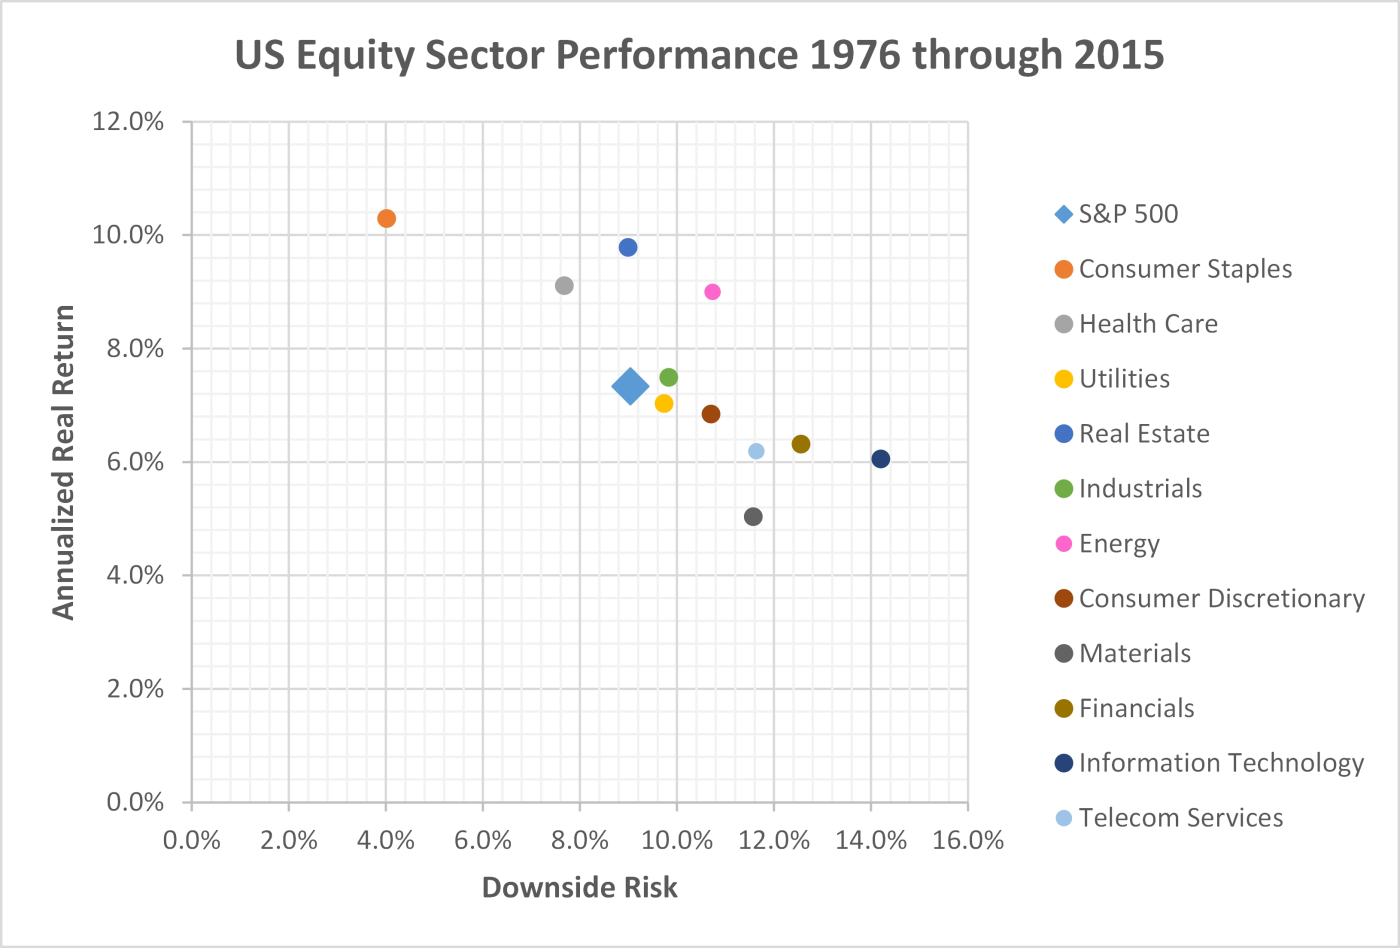 annualized-return-downside-risk-US-equity-sectors-1976-through-2015